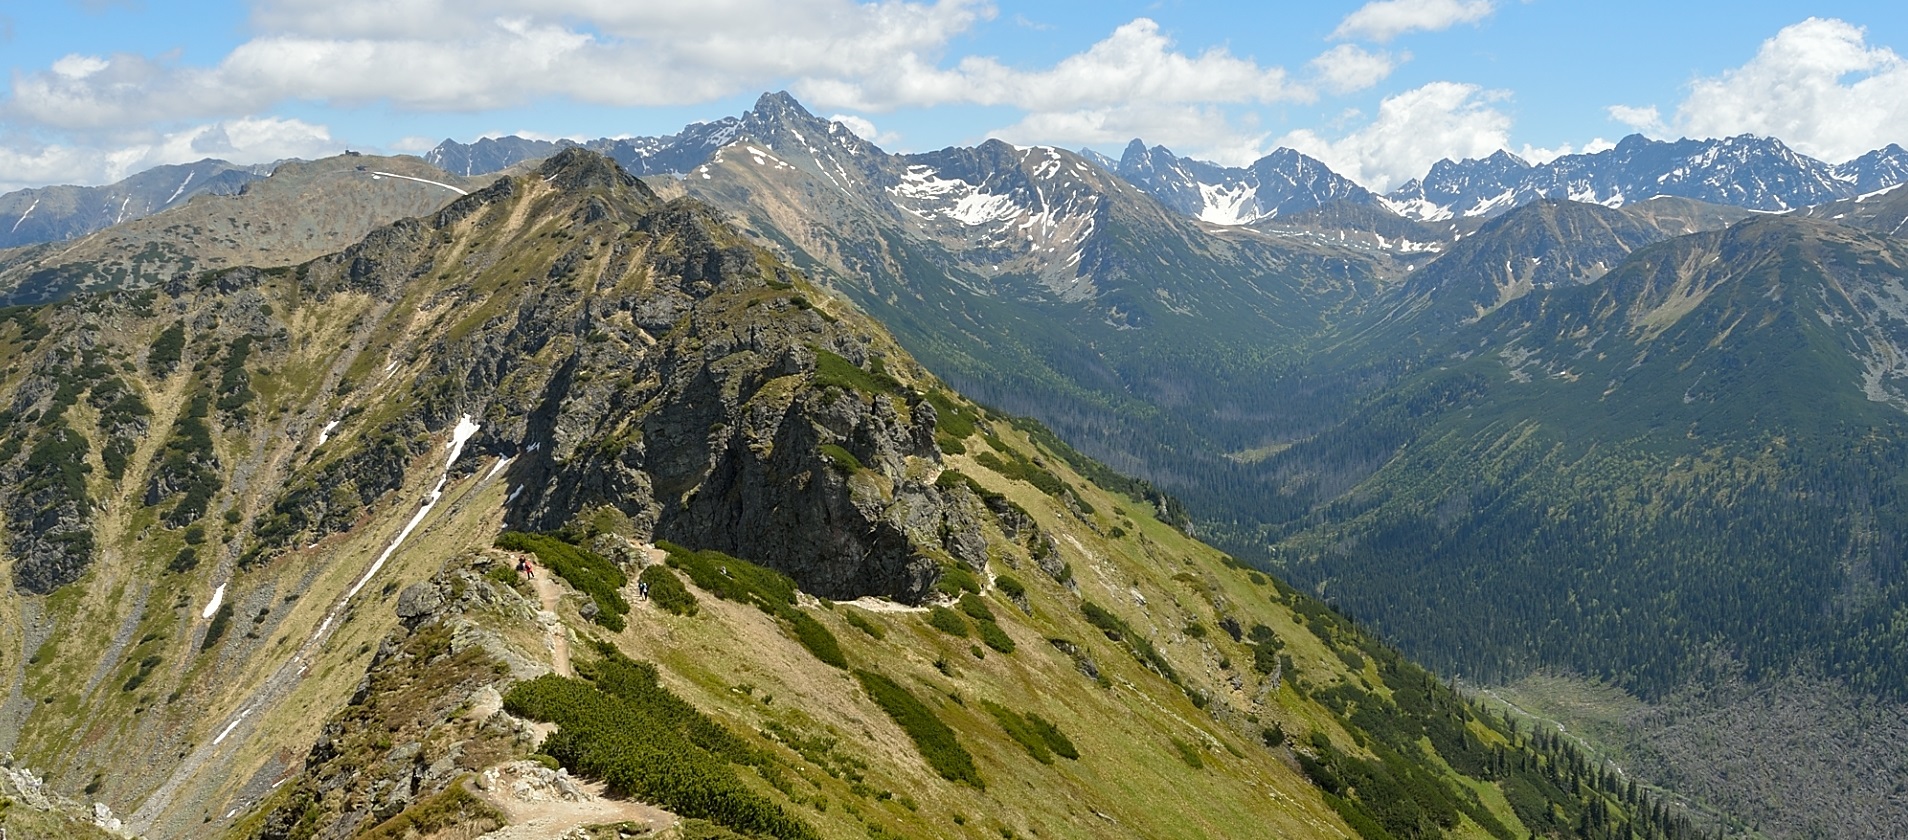 Two outstandingly beautiful days in Tatra mountains. Photogallery.